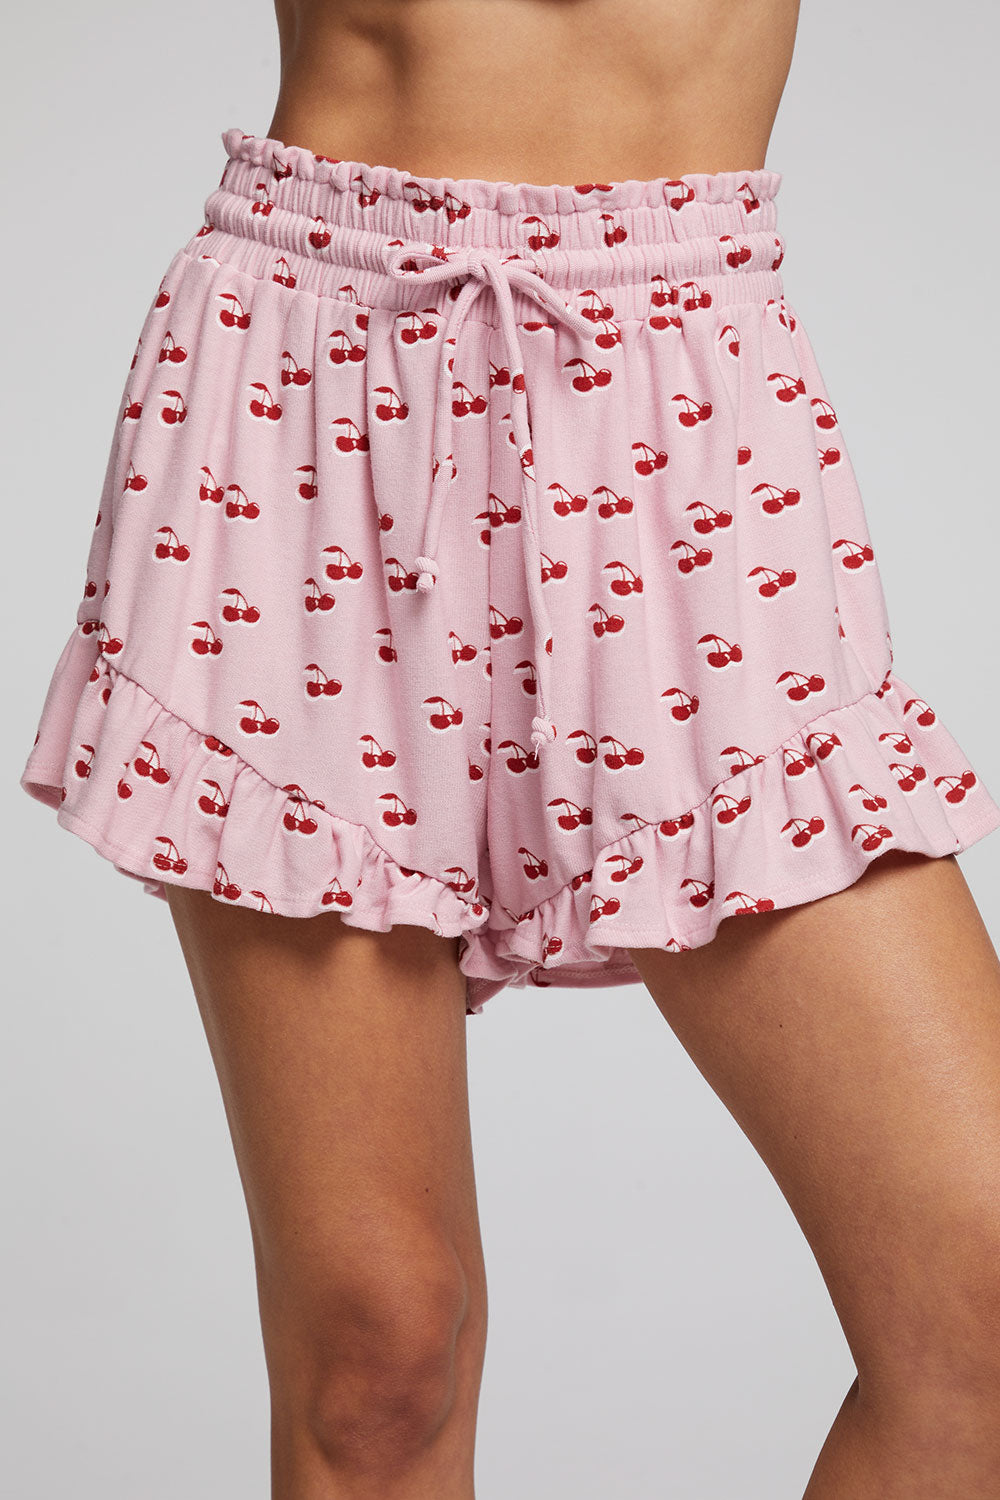 Cherry Shorts WOMENS chaserbrand